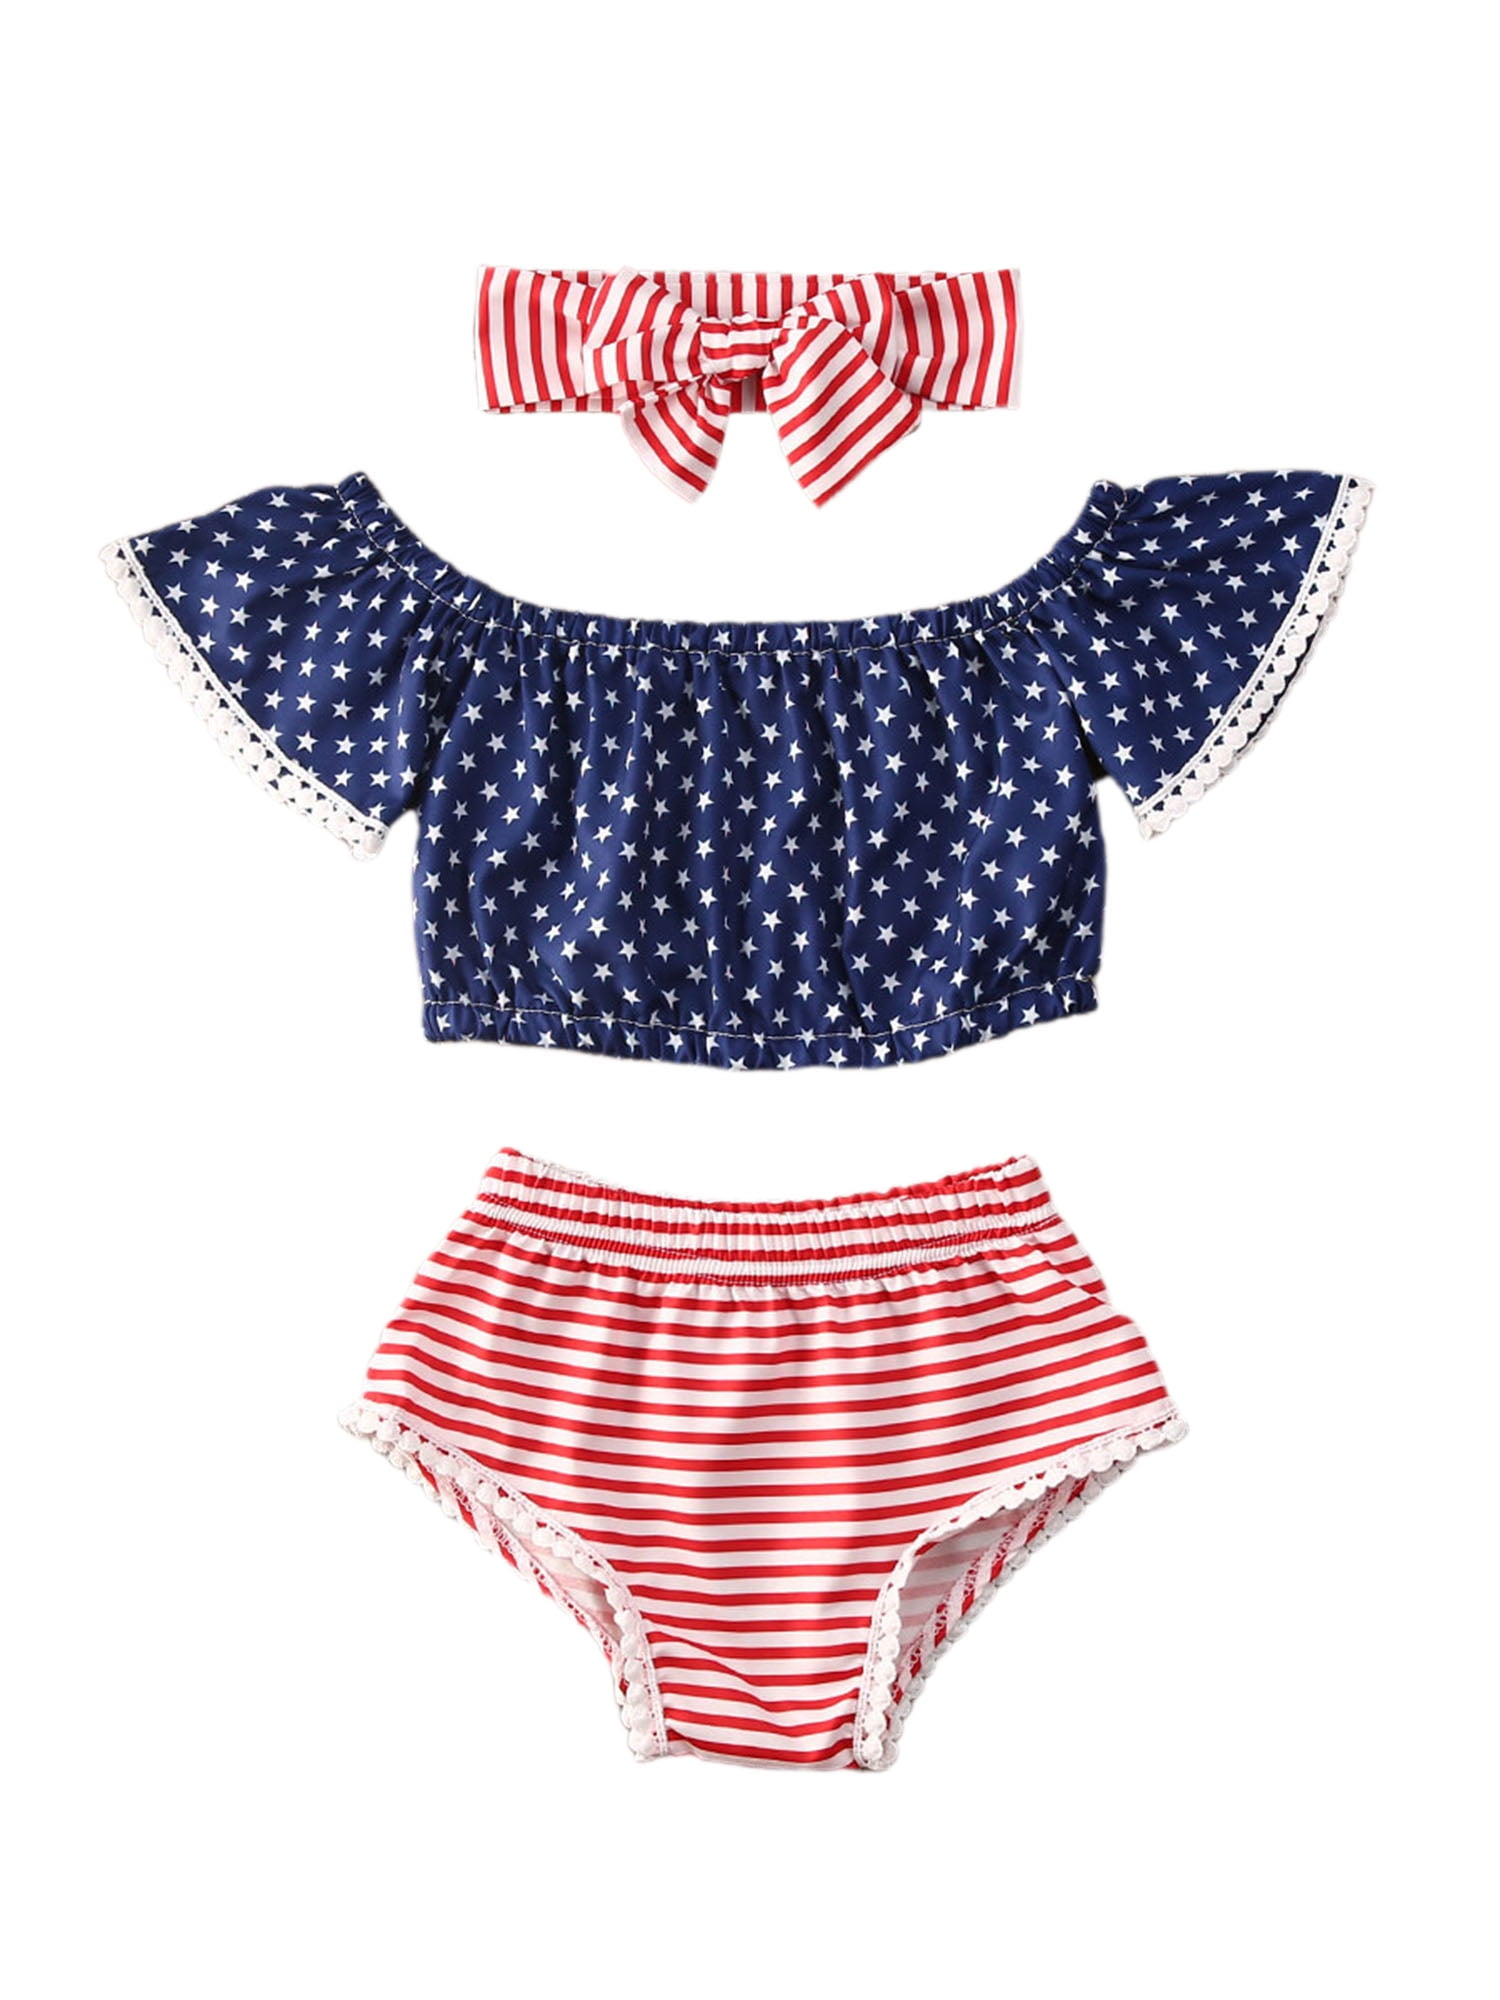 ADDRUALI0 Independence Day 3Pcs Outfits Newborn Kids Baby Girl Star Off Shoulder Crop Top Headband Bowknot Striped Shorts 